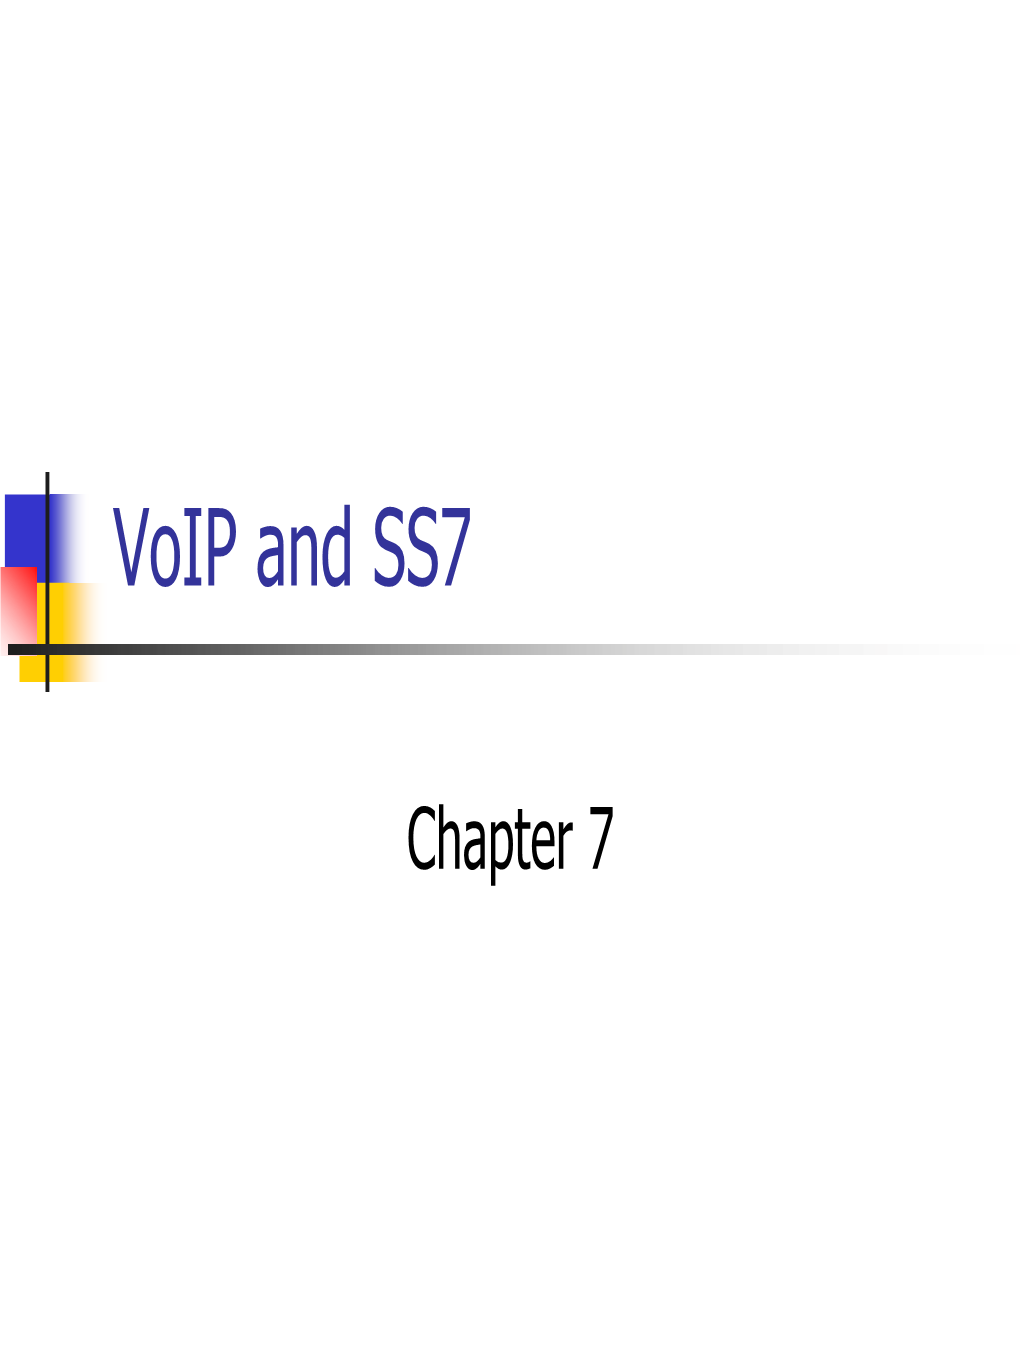 Voip and SS7